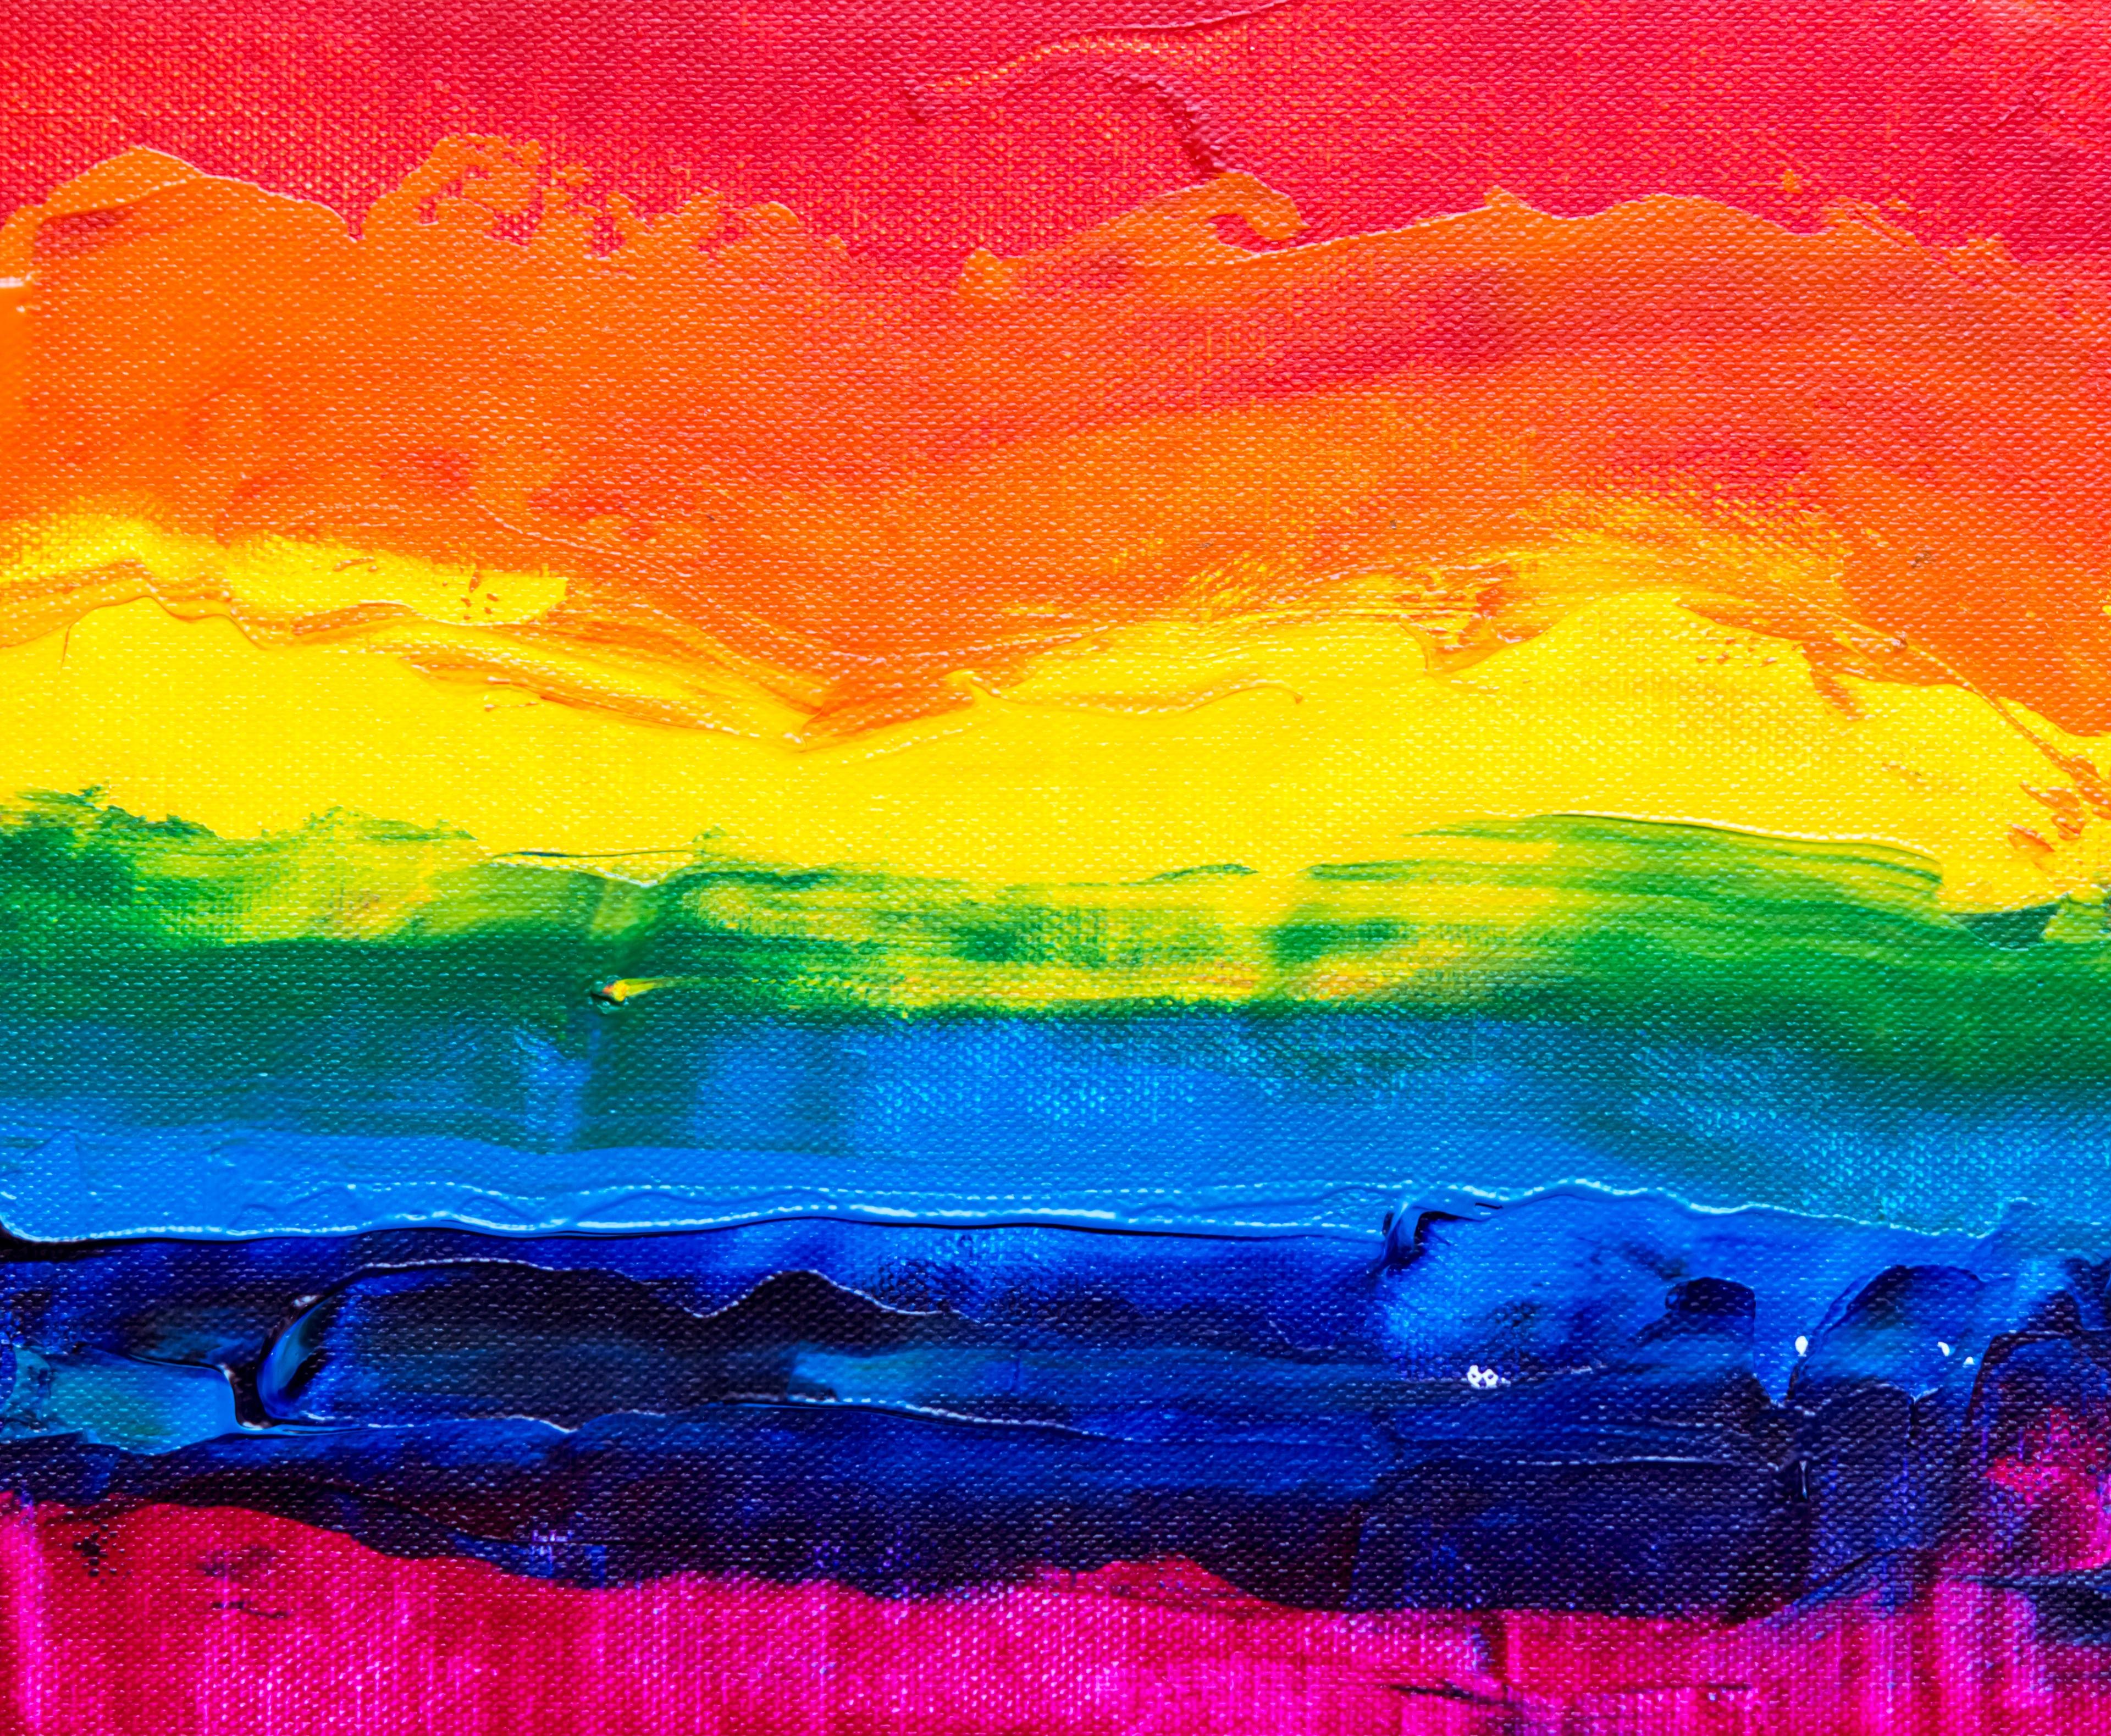 A painting with colors in rainbow order